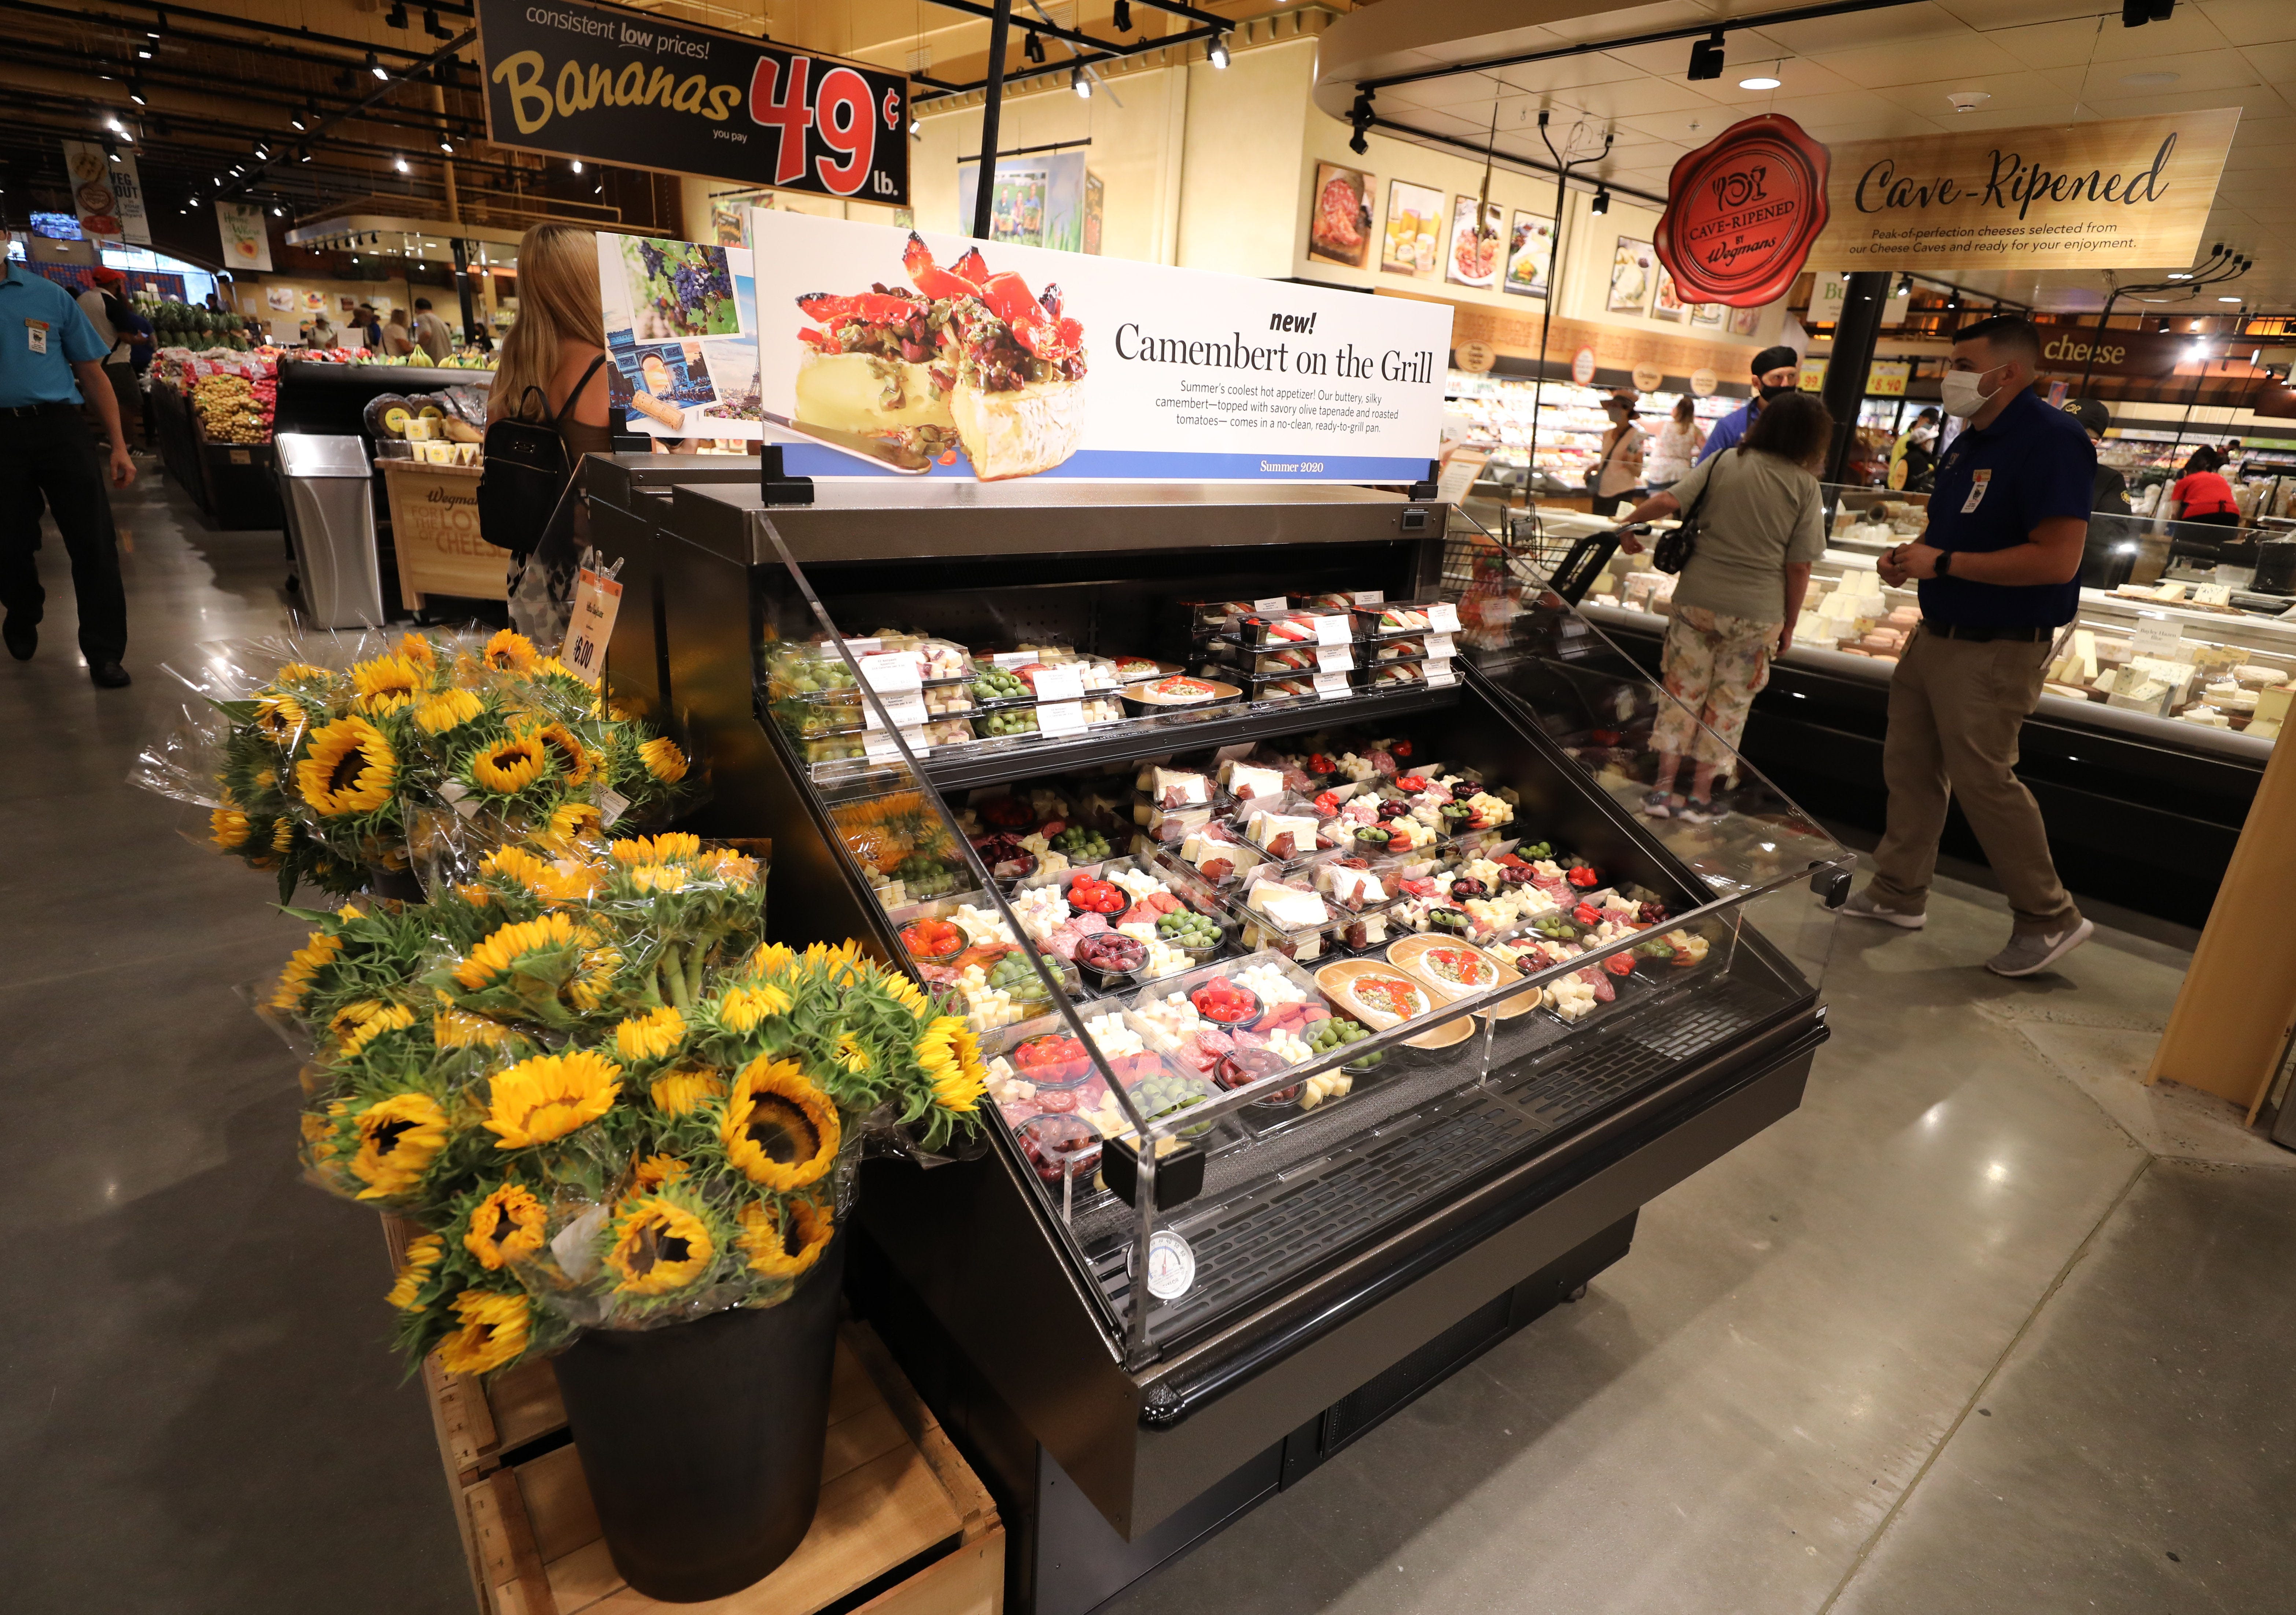 Flowers, cheese and fruit on display on the opening day of the Wegmans in Harrison, New York, on Aug. 5, 2020.